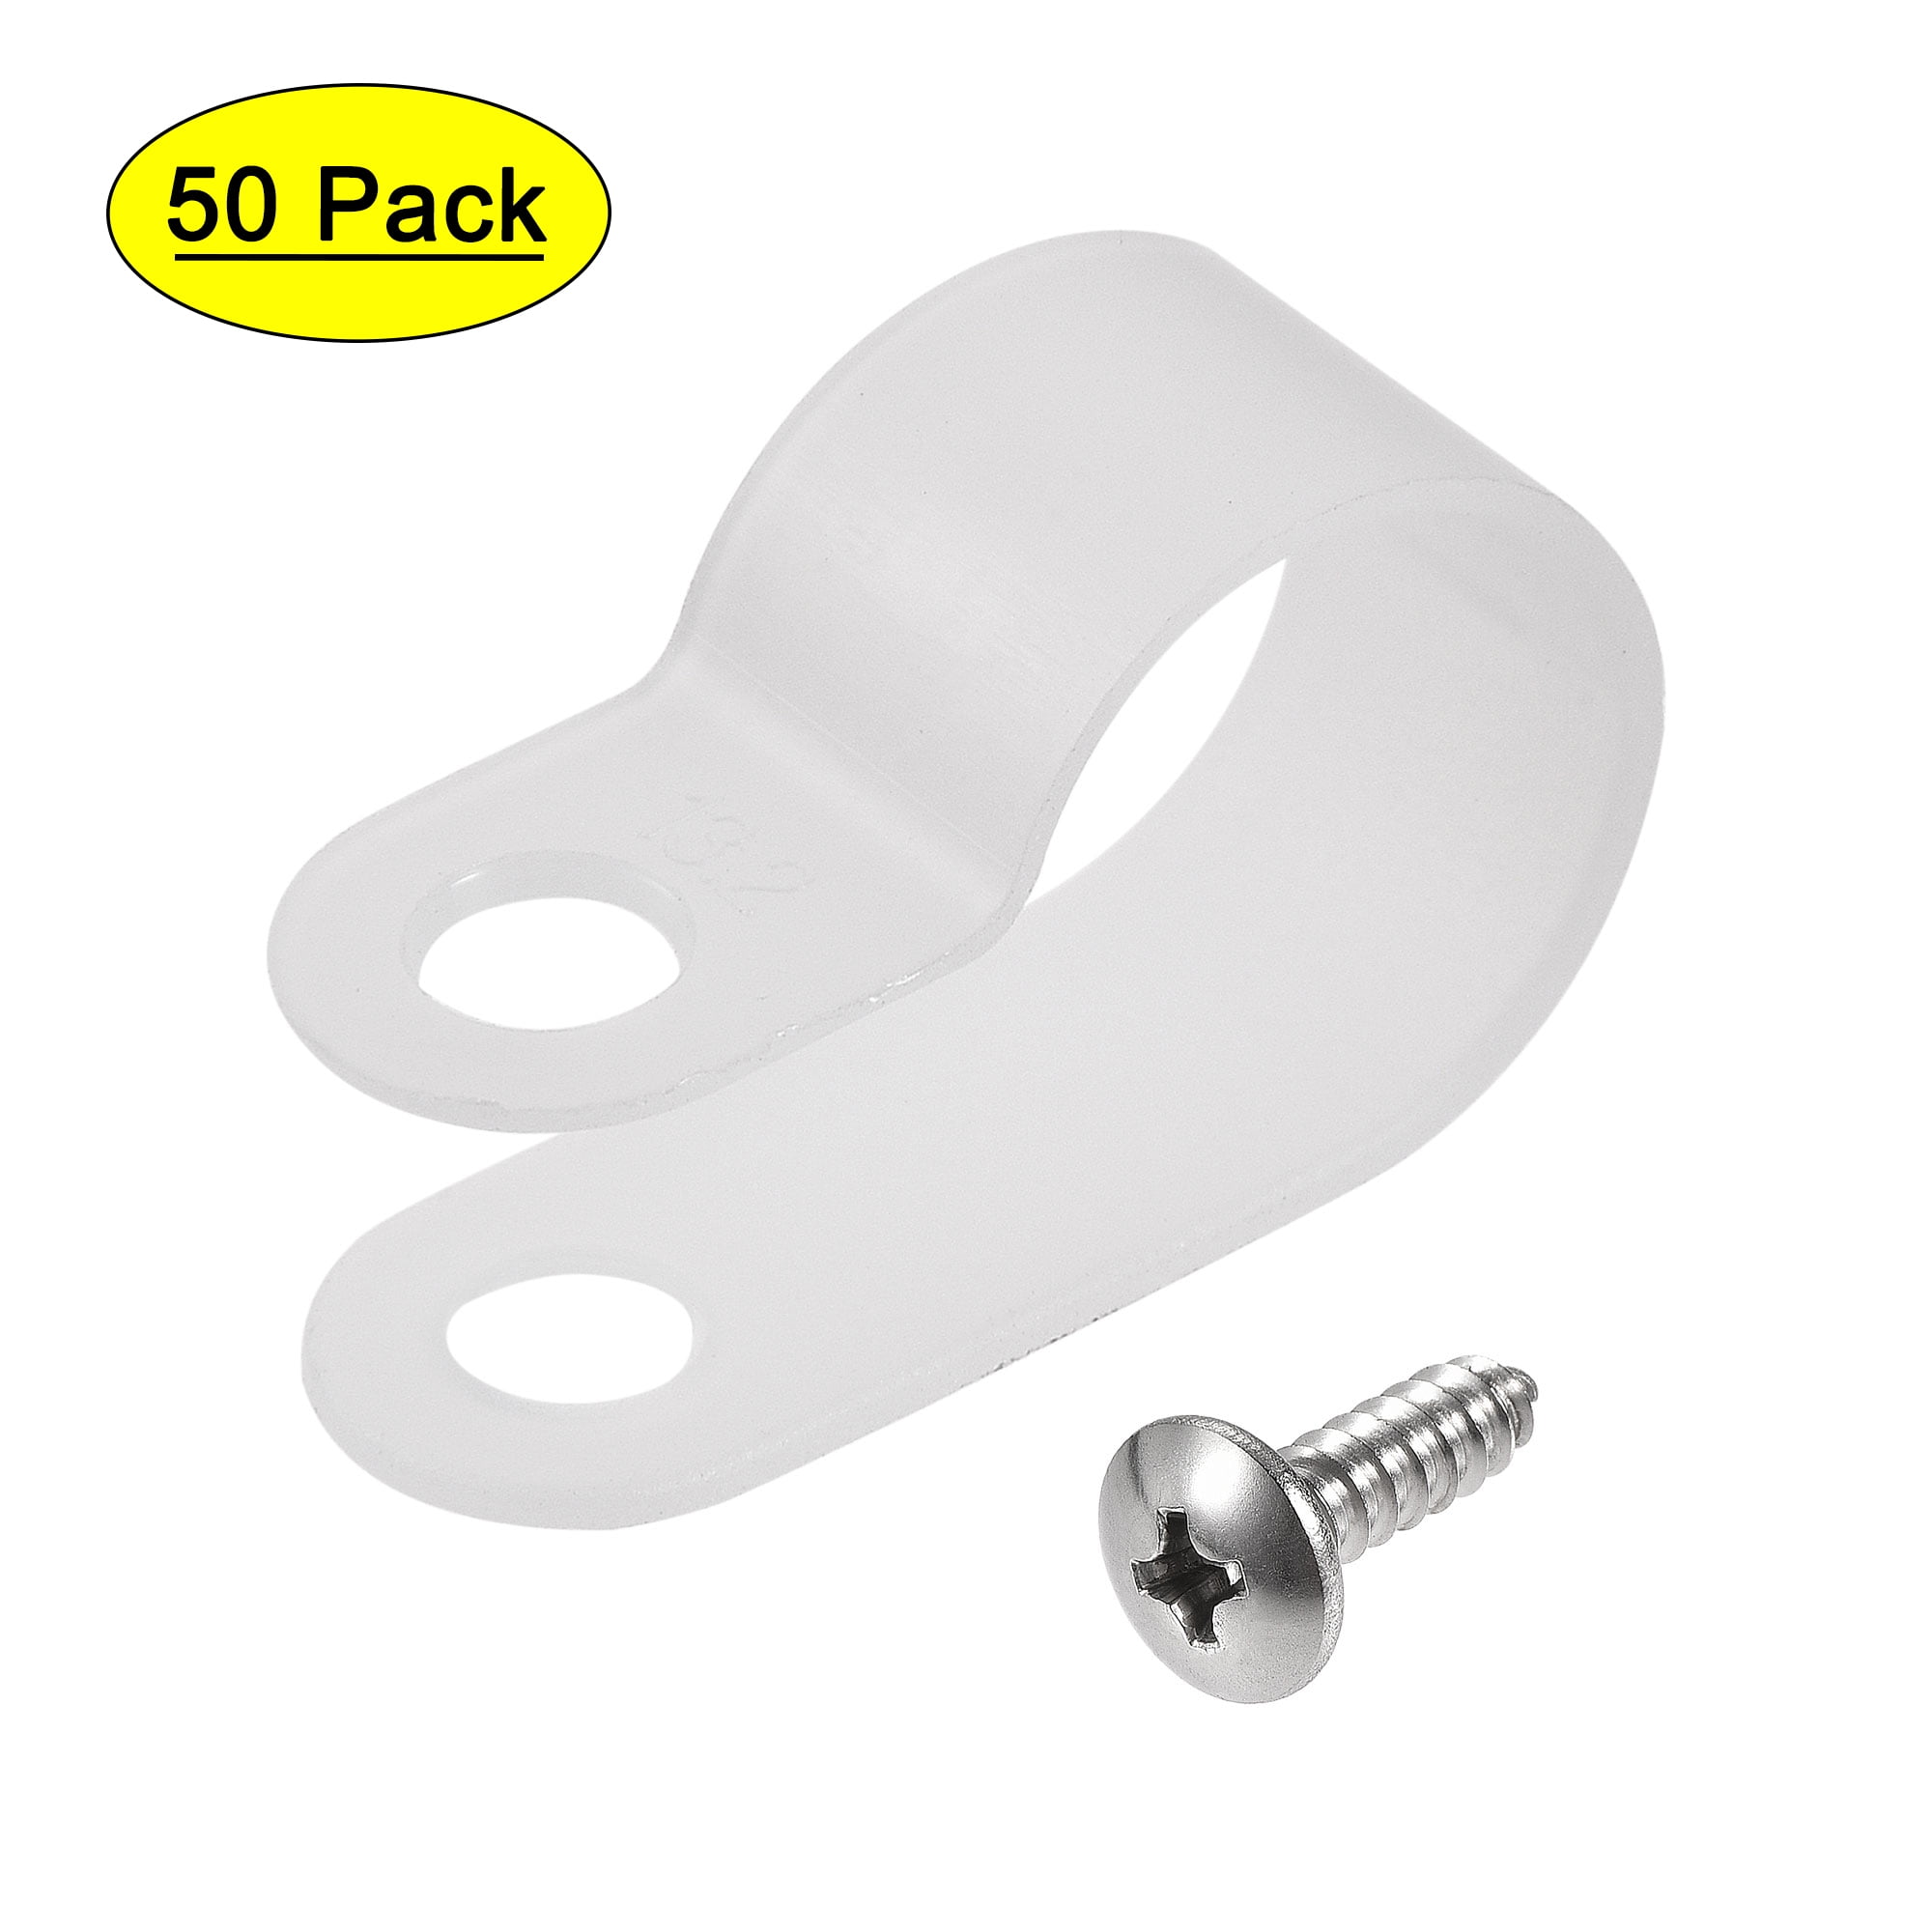 Gardner Bender 1 in. Rubber Insulated Metal Clamp (1-Pack) PPR